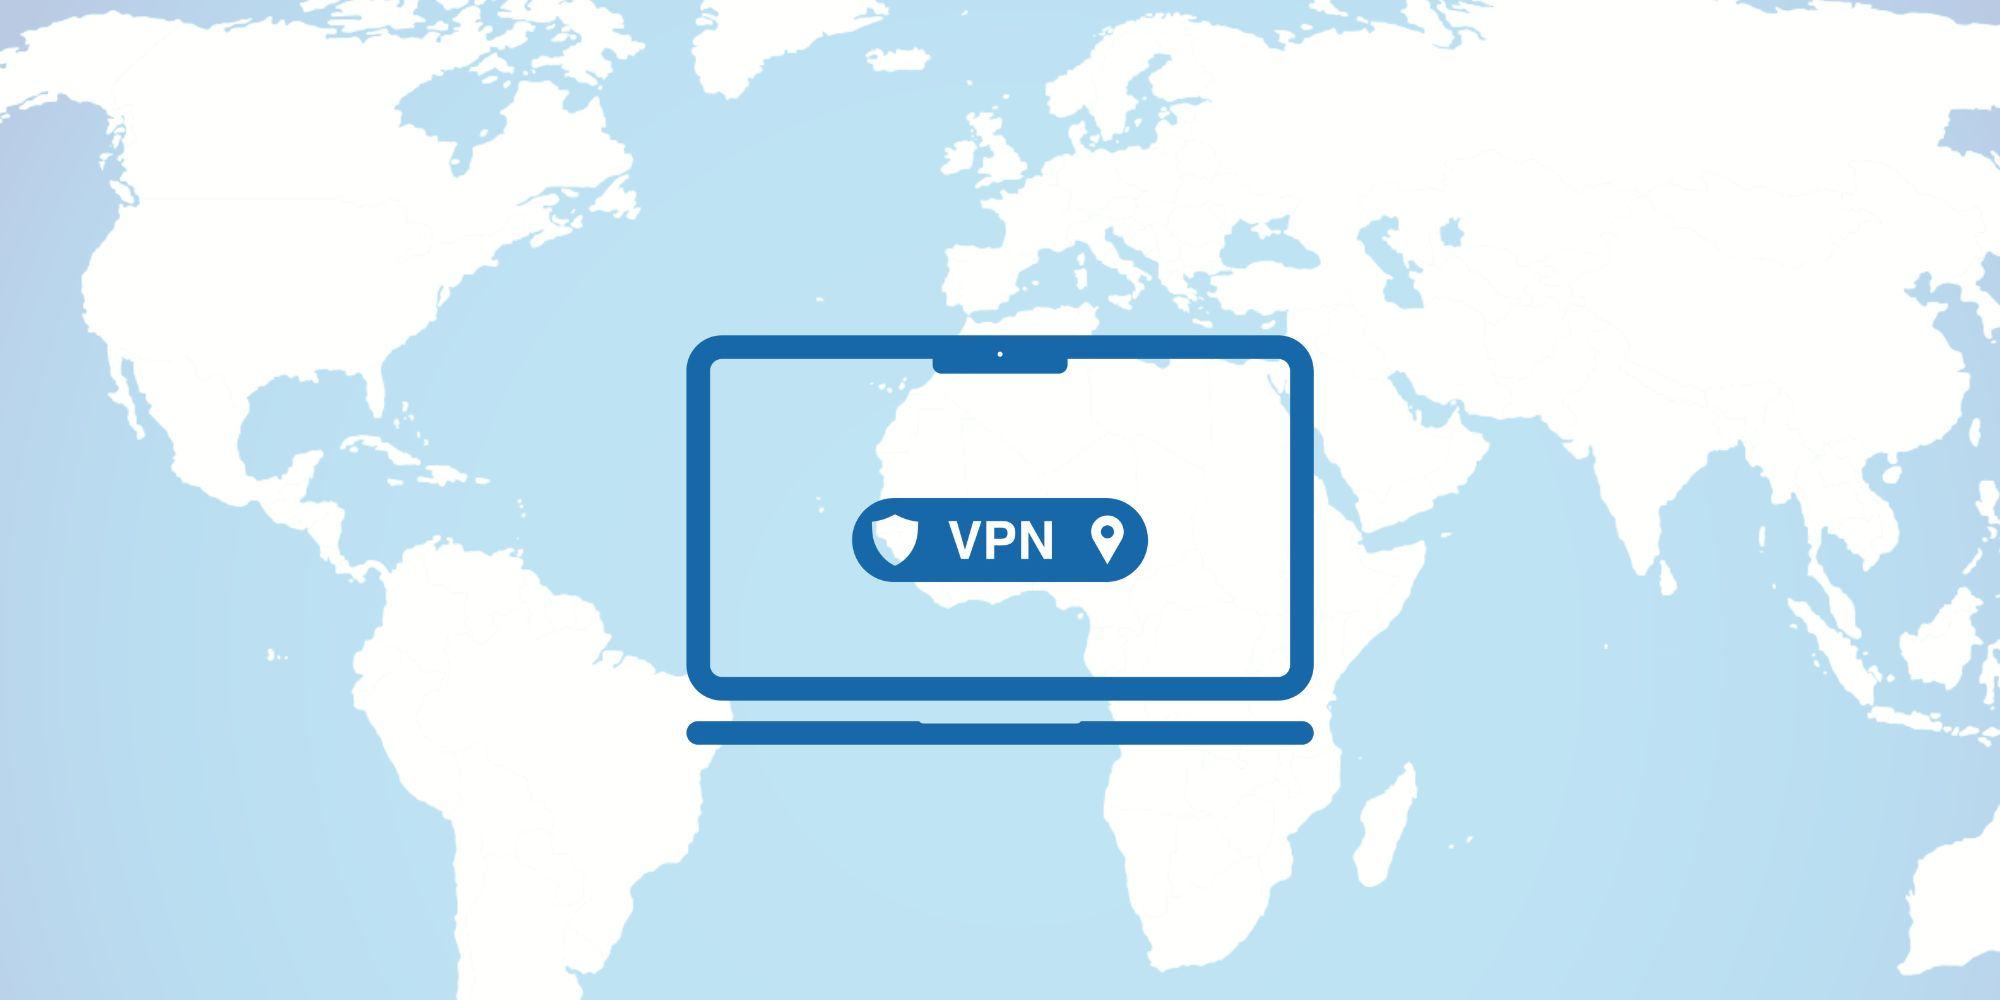 Use a VPN while traveling abroad